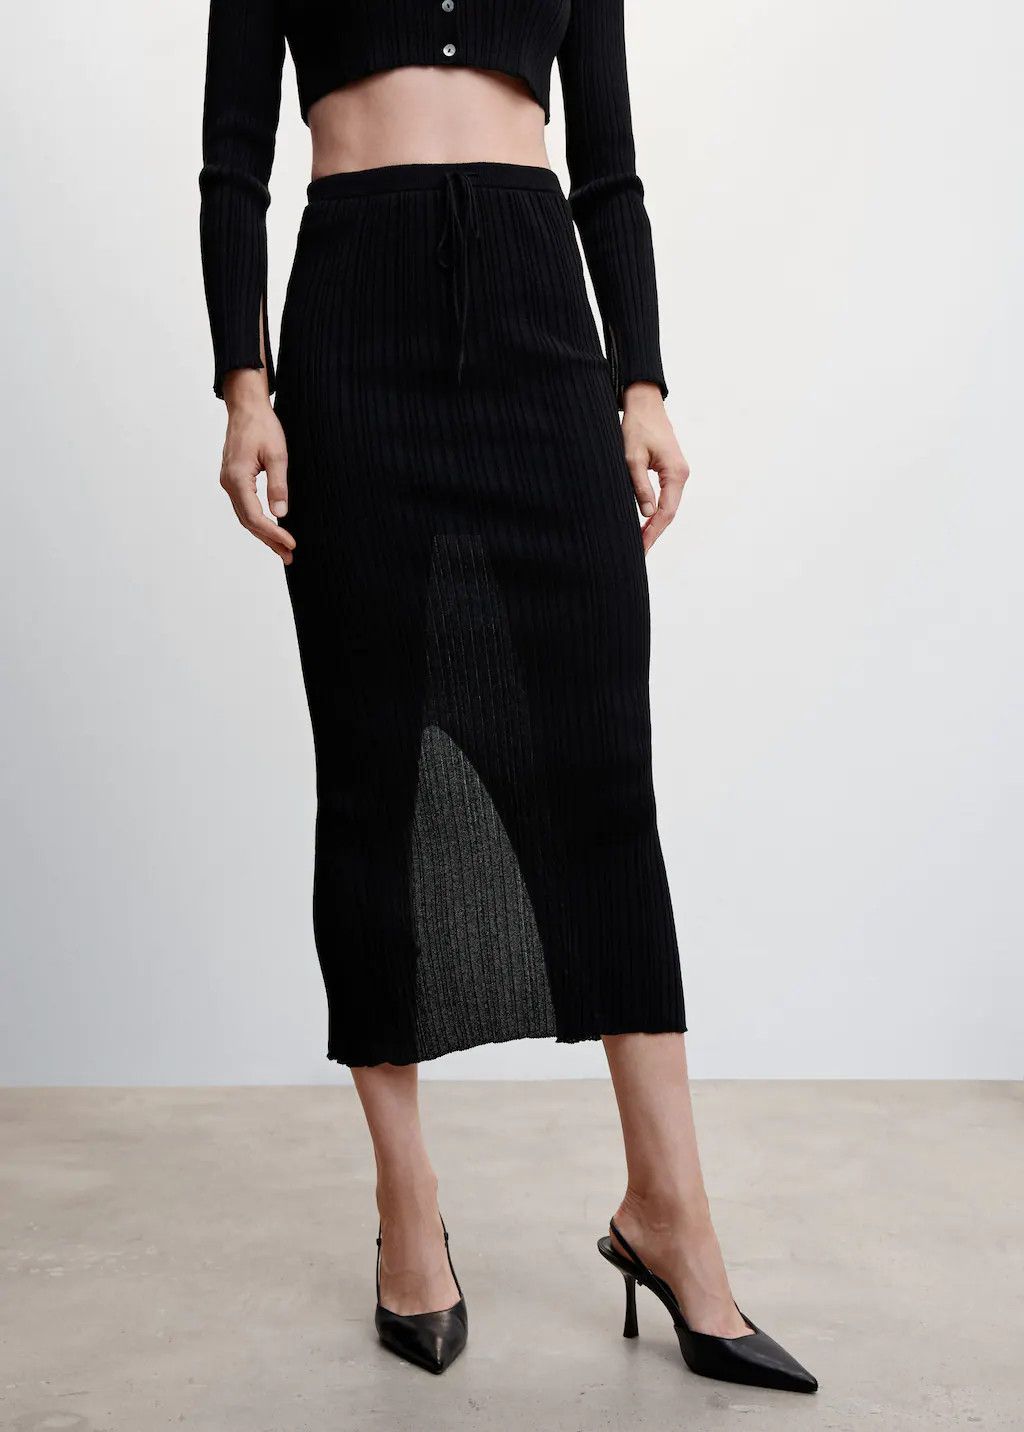 Ribbed midi skirt | Black Skirt Skirts | Skirt Outfit | Skirt And Sweater | Work Outfit Winter | MANGO (US)